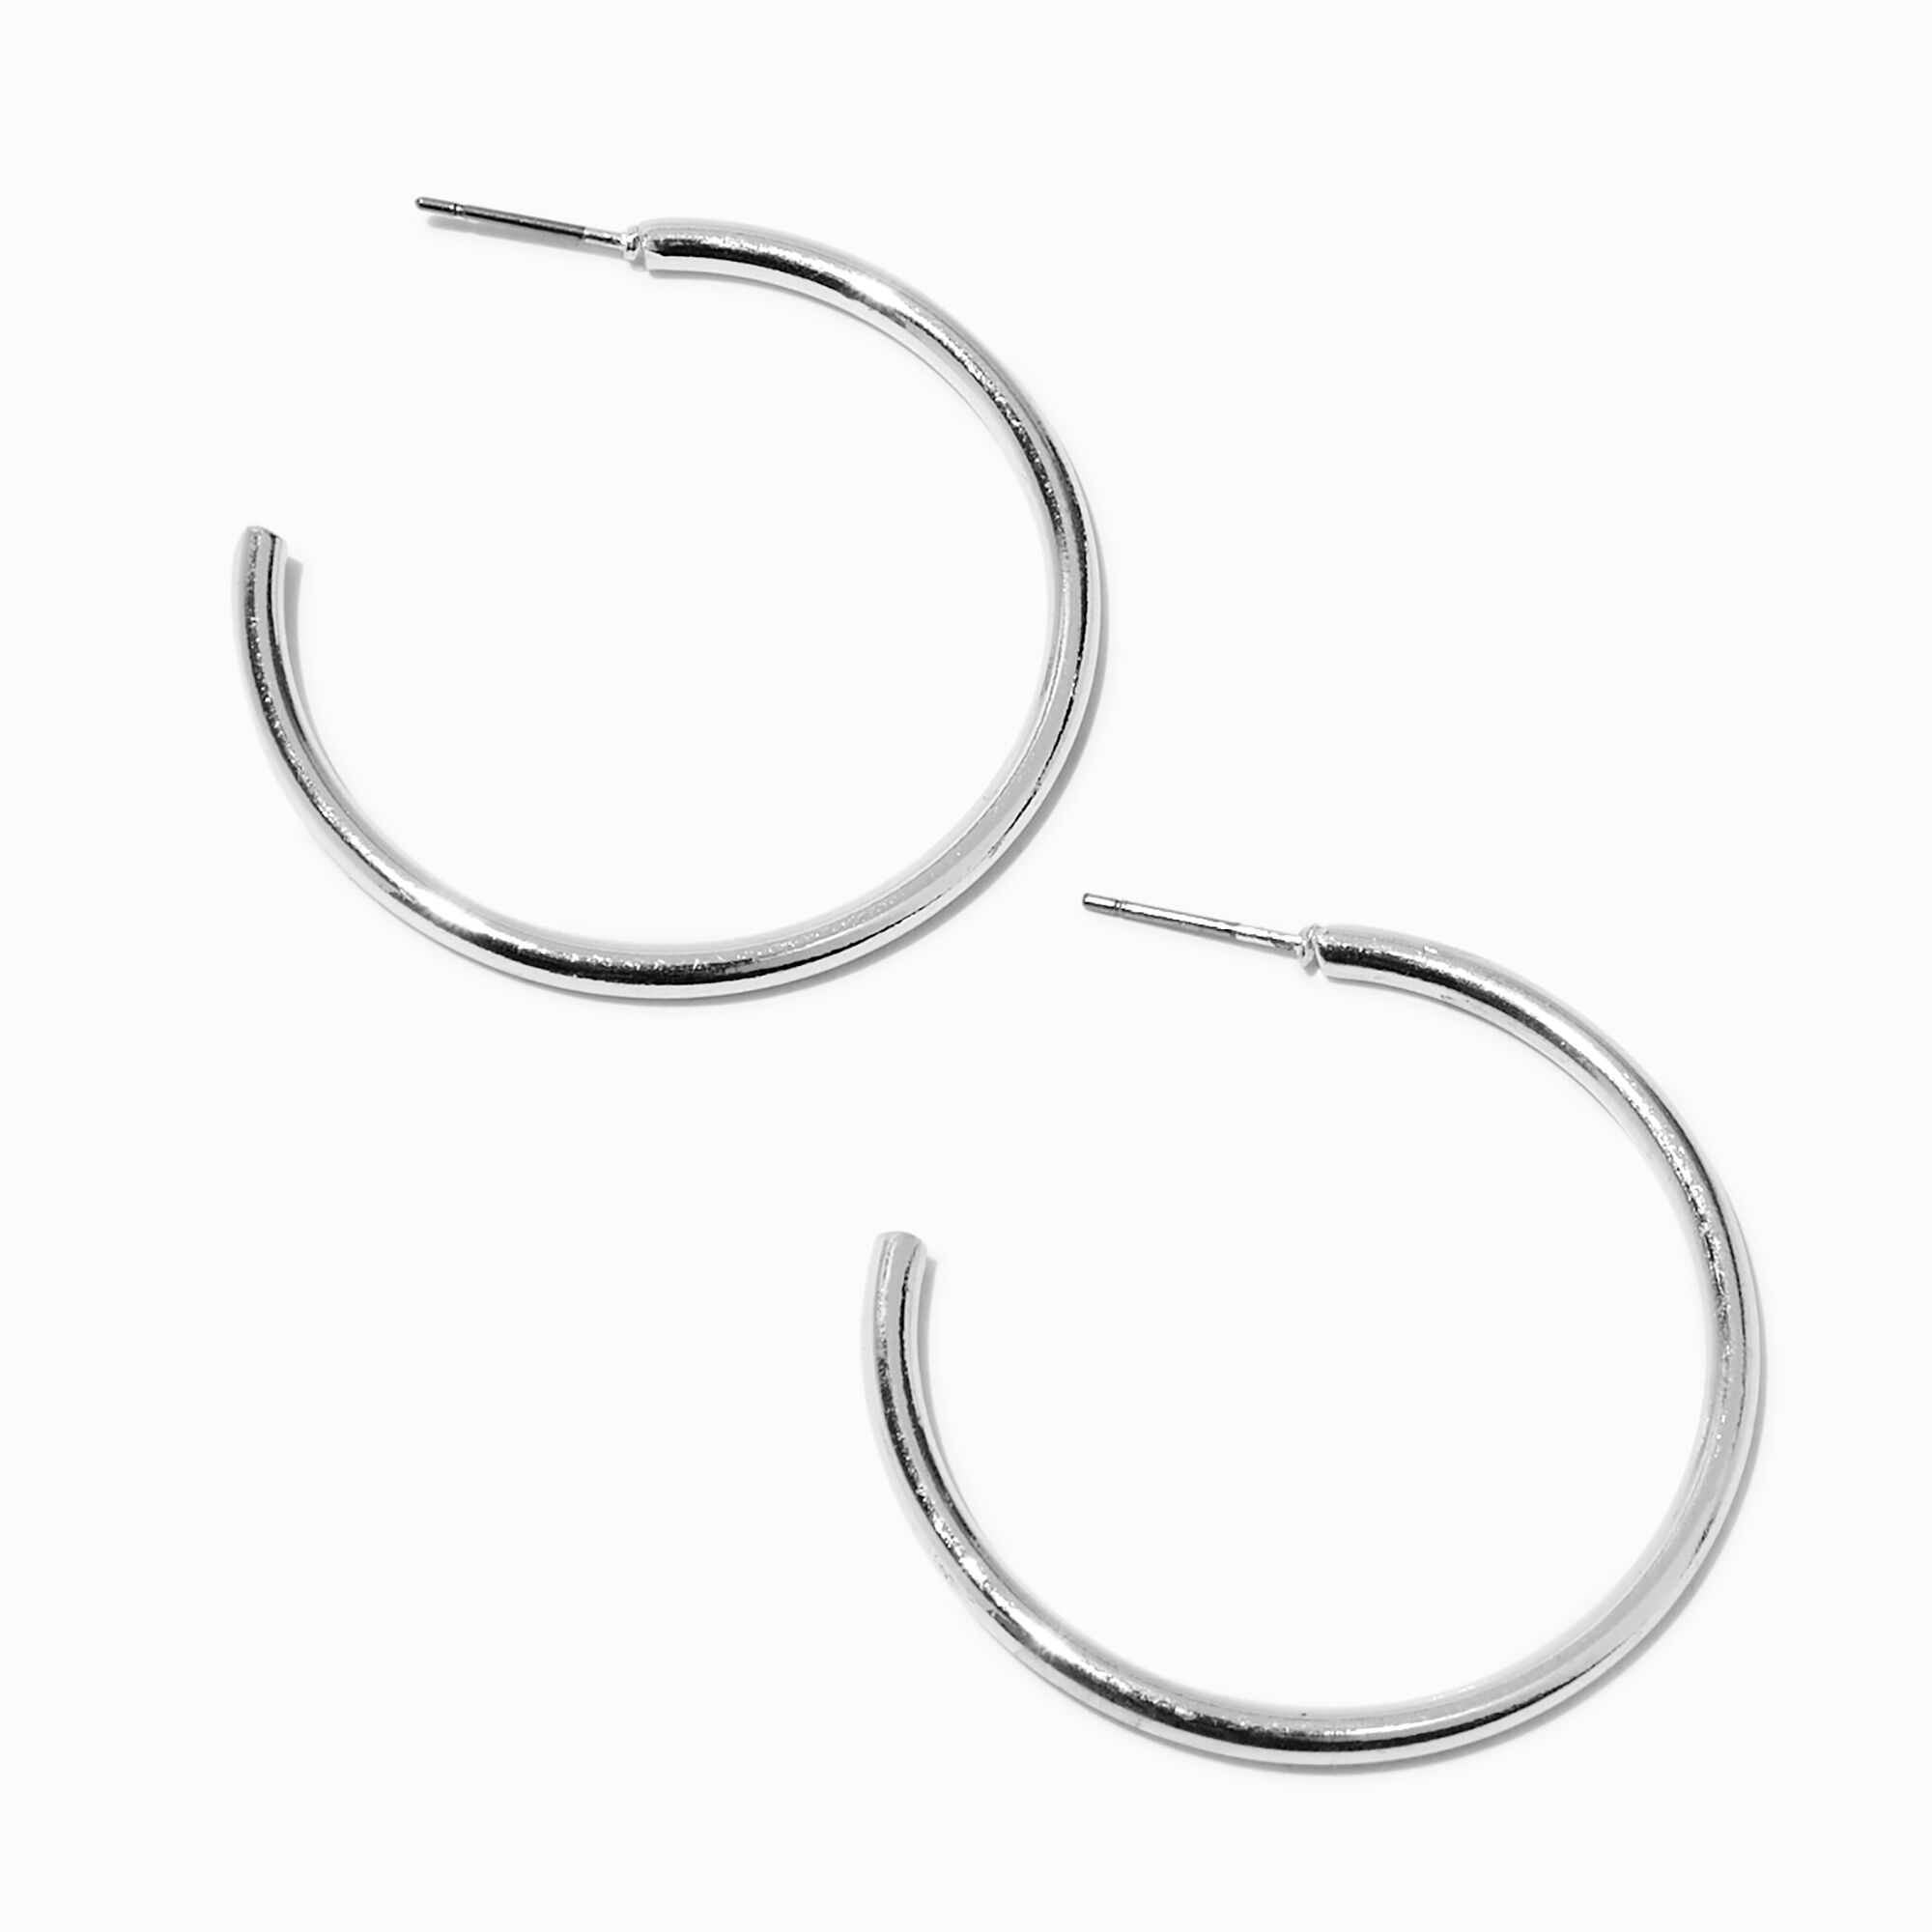 View Claires Tone 40MM Tubular Hoop Earrings Silver information